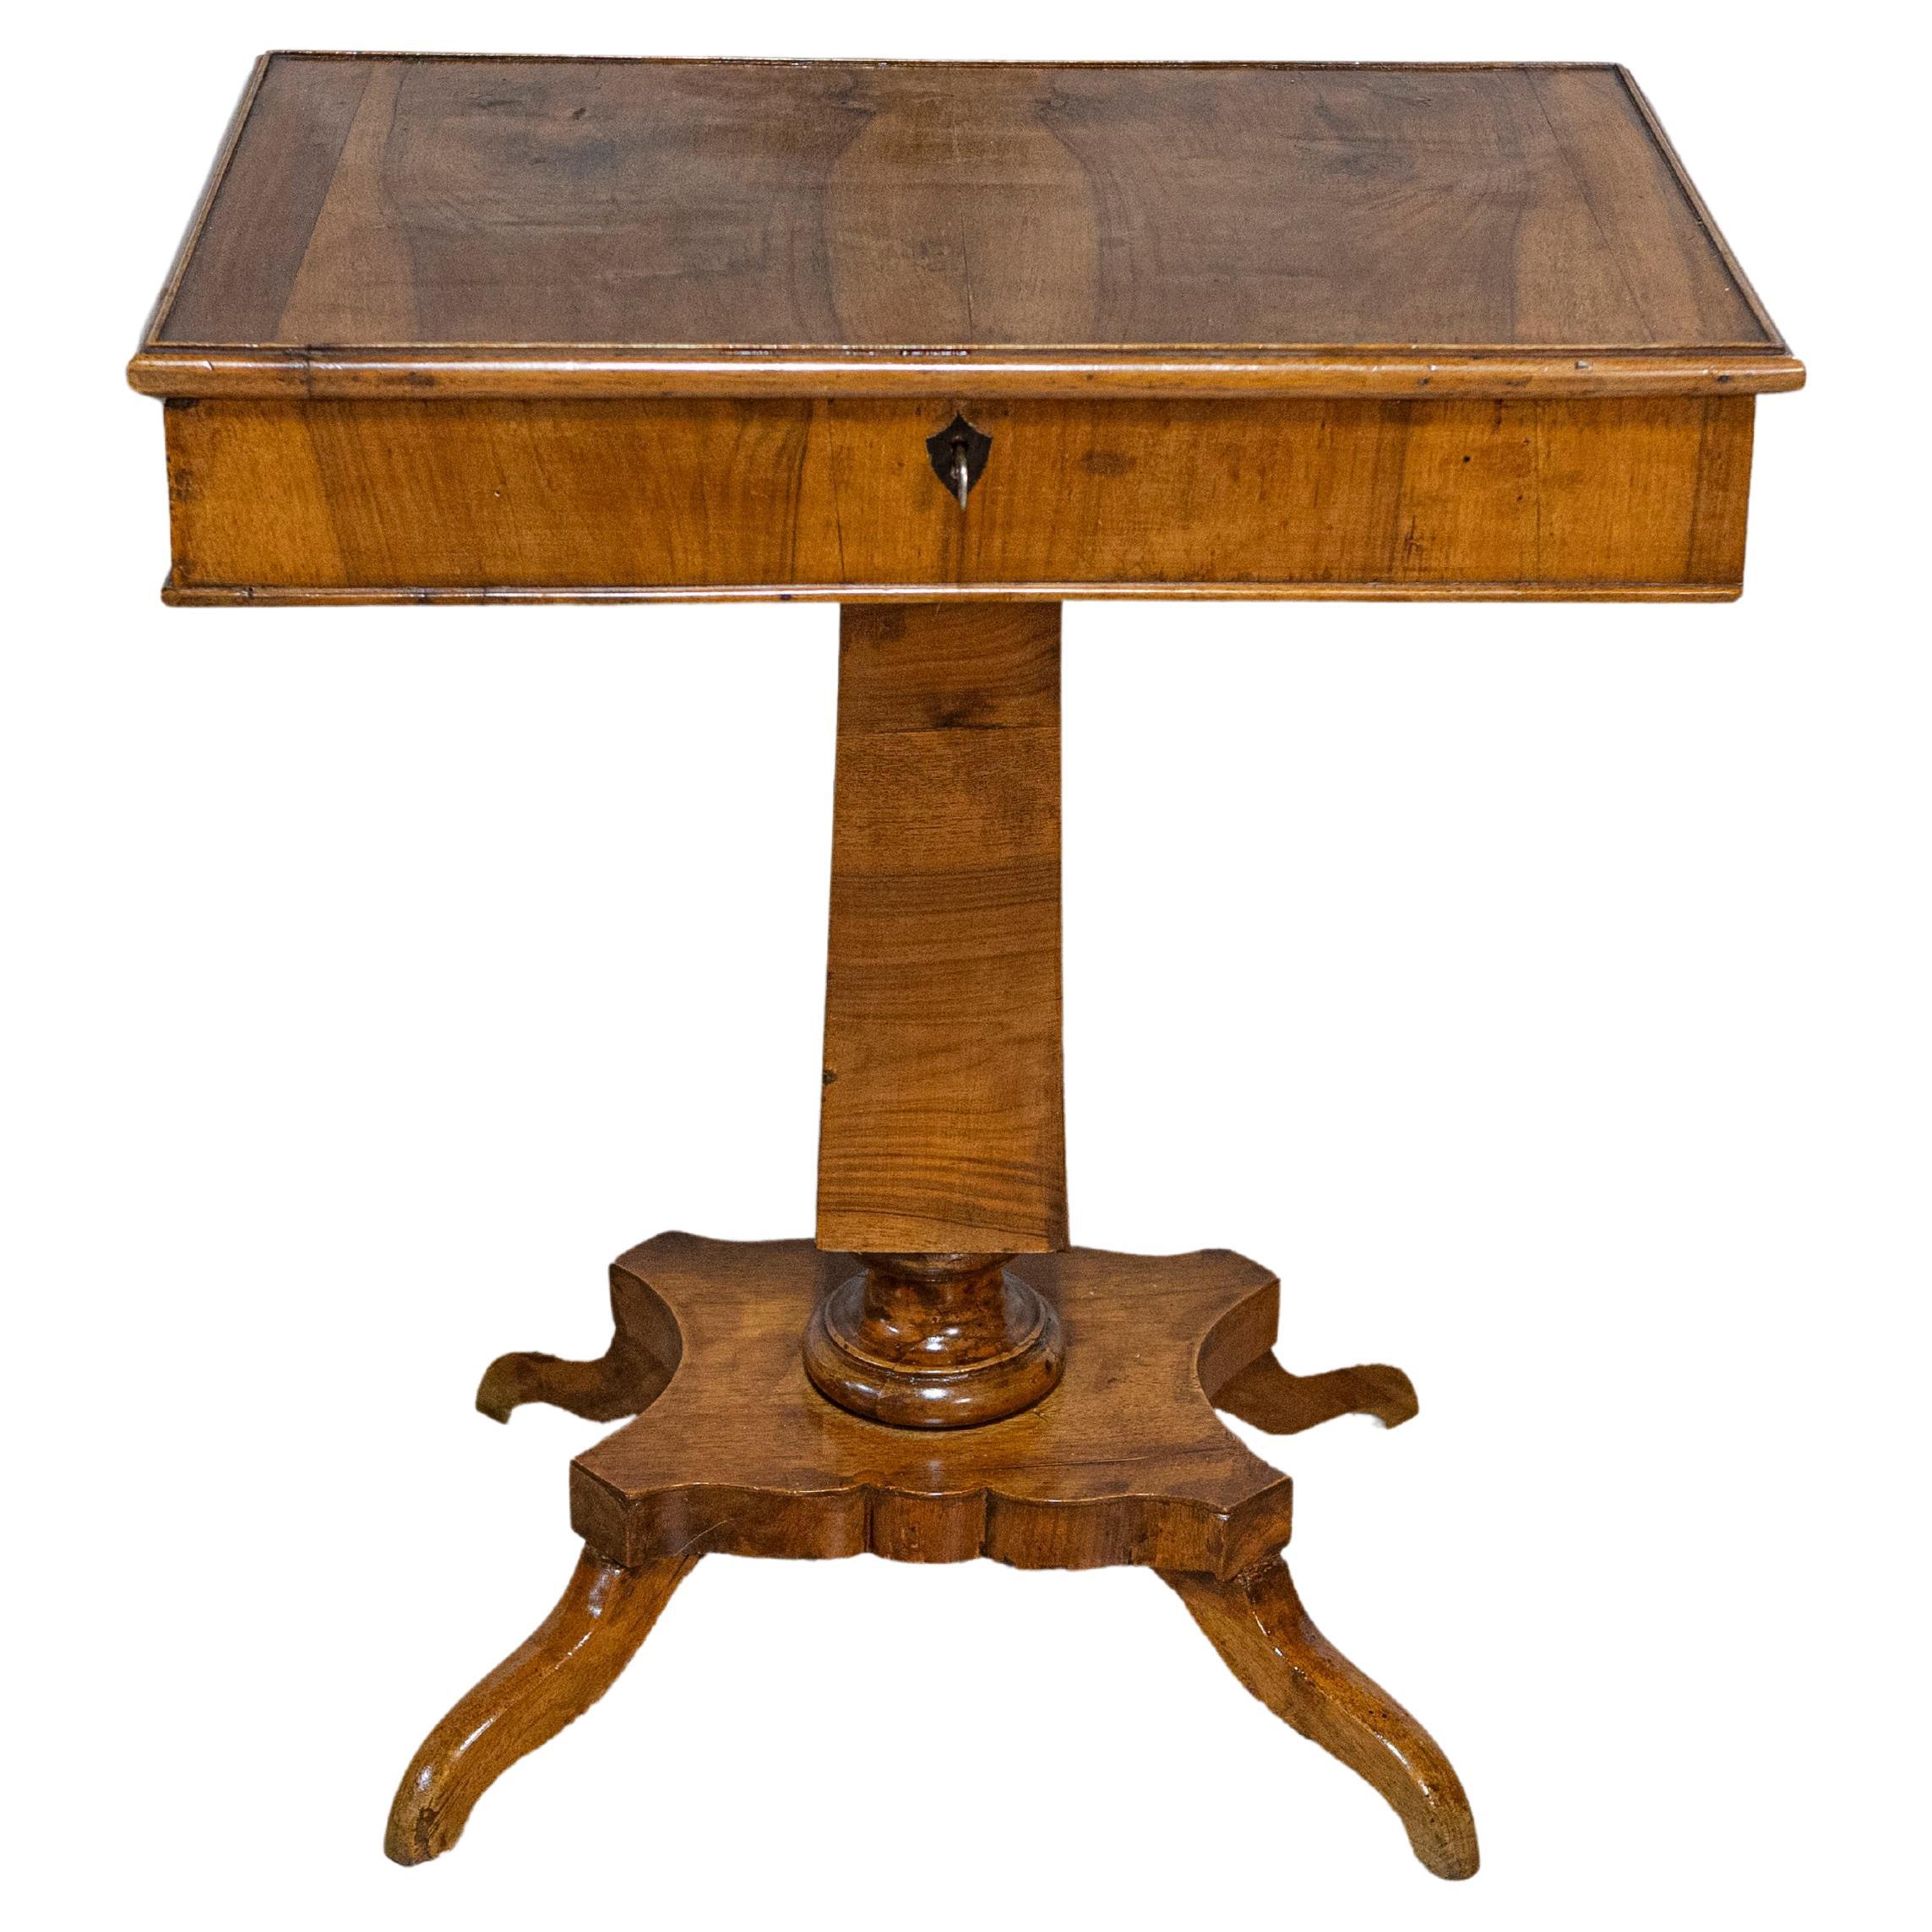 Italian 19th Century Walnut Pedestal Table with Quadripod Base and Single Drawer For Sale